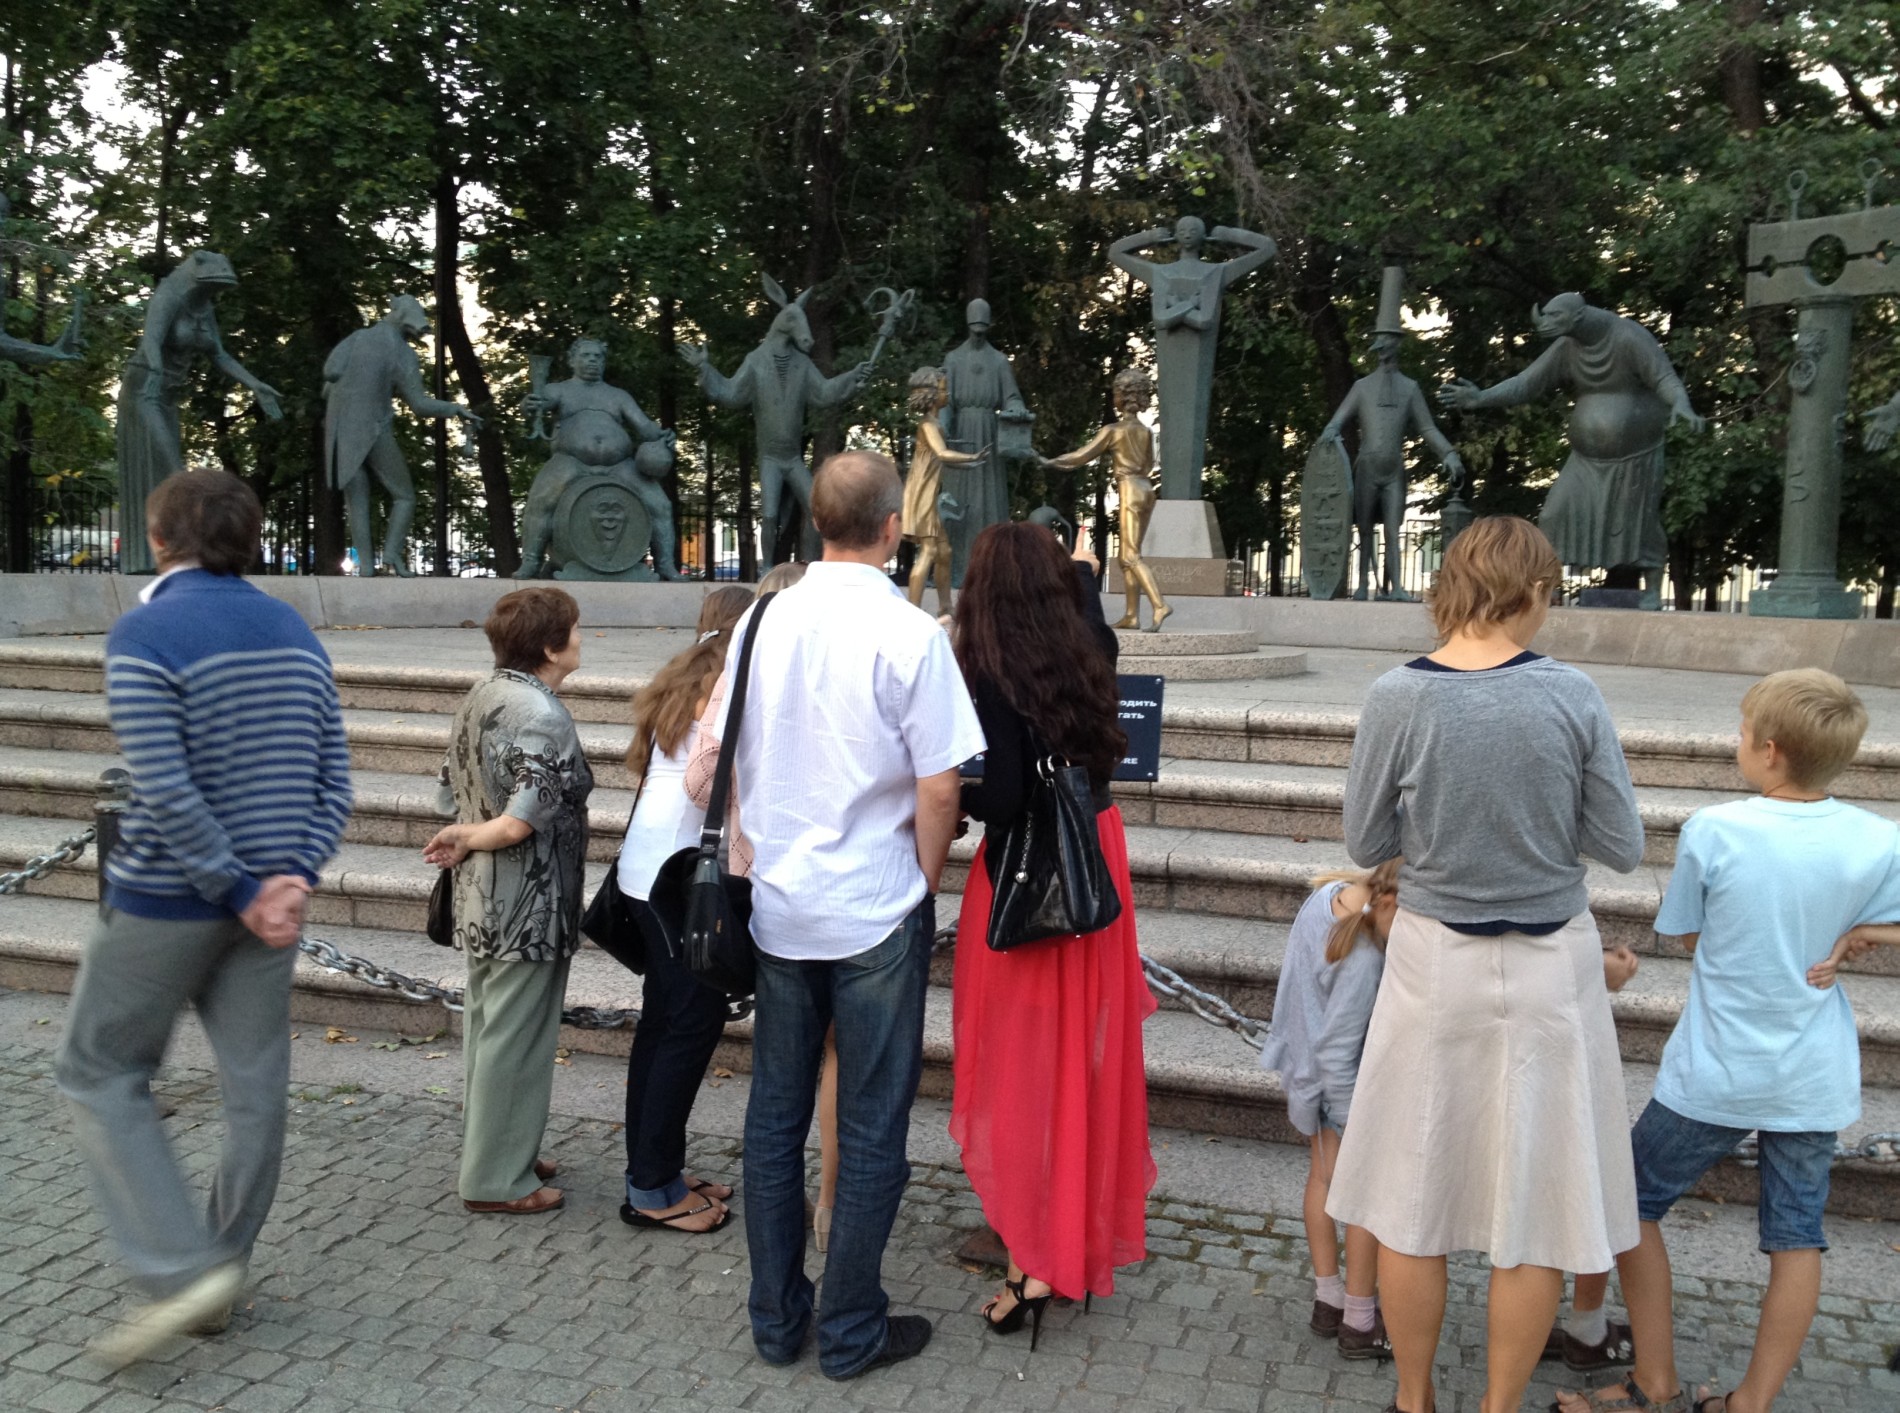 Tourists look at The Sins Monument in Bolotnaya Ploshchad in Moscow.